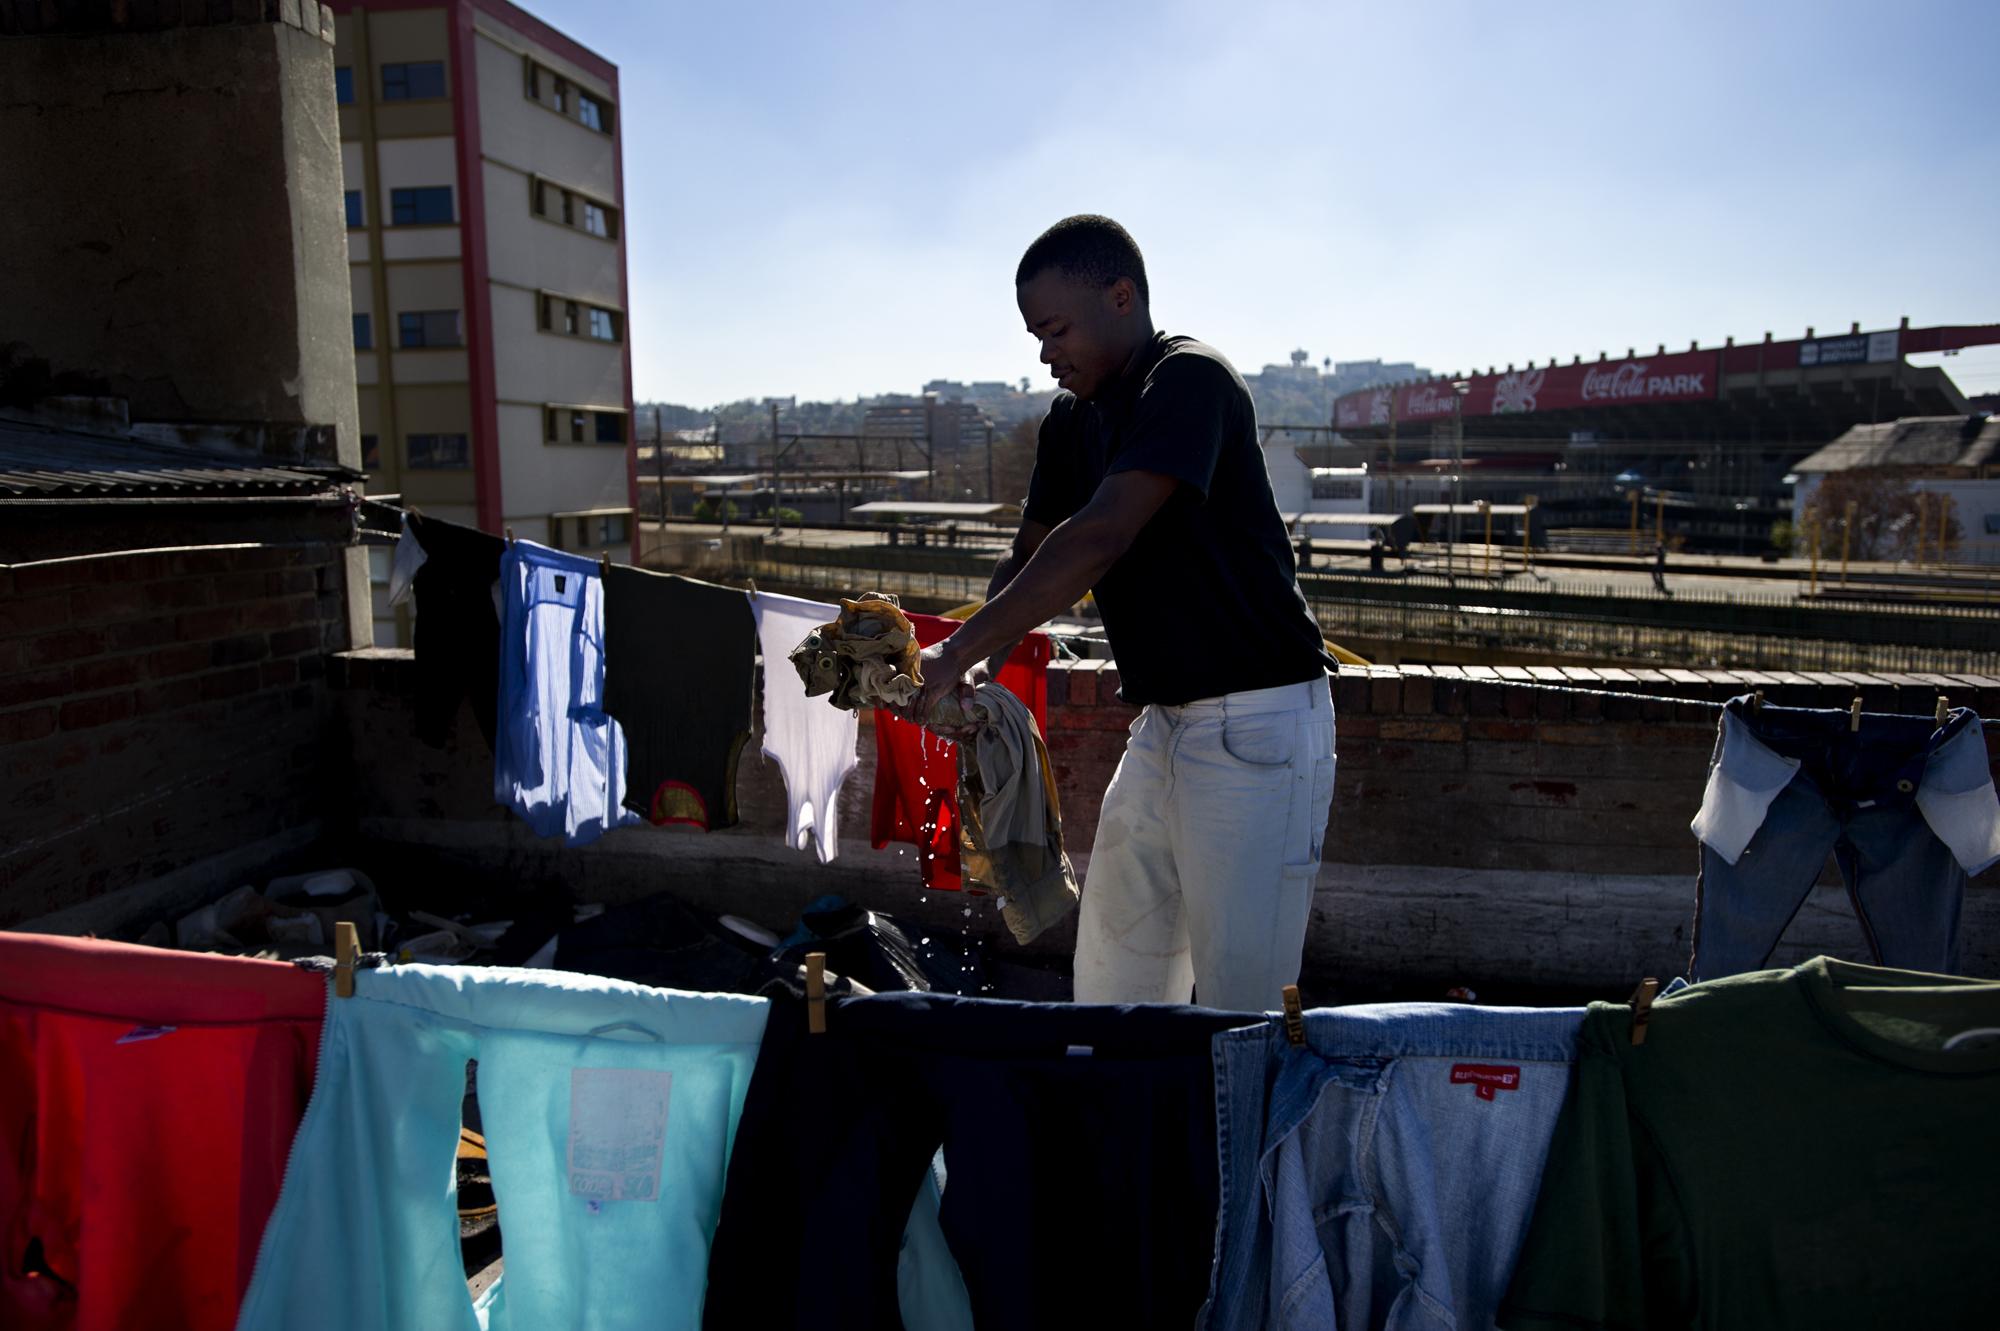 Into the shadows - Johannesburg, South Africa. June 2011. A young Zimbabwean...